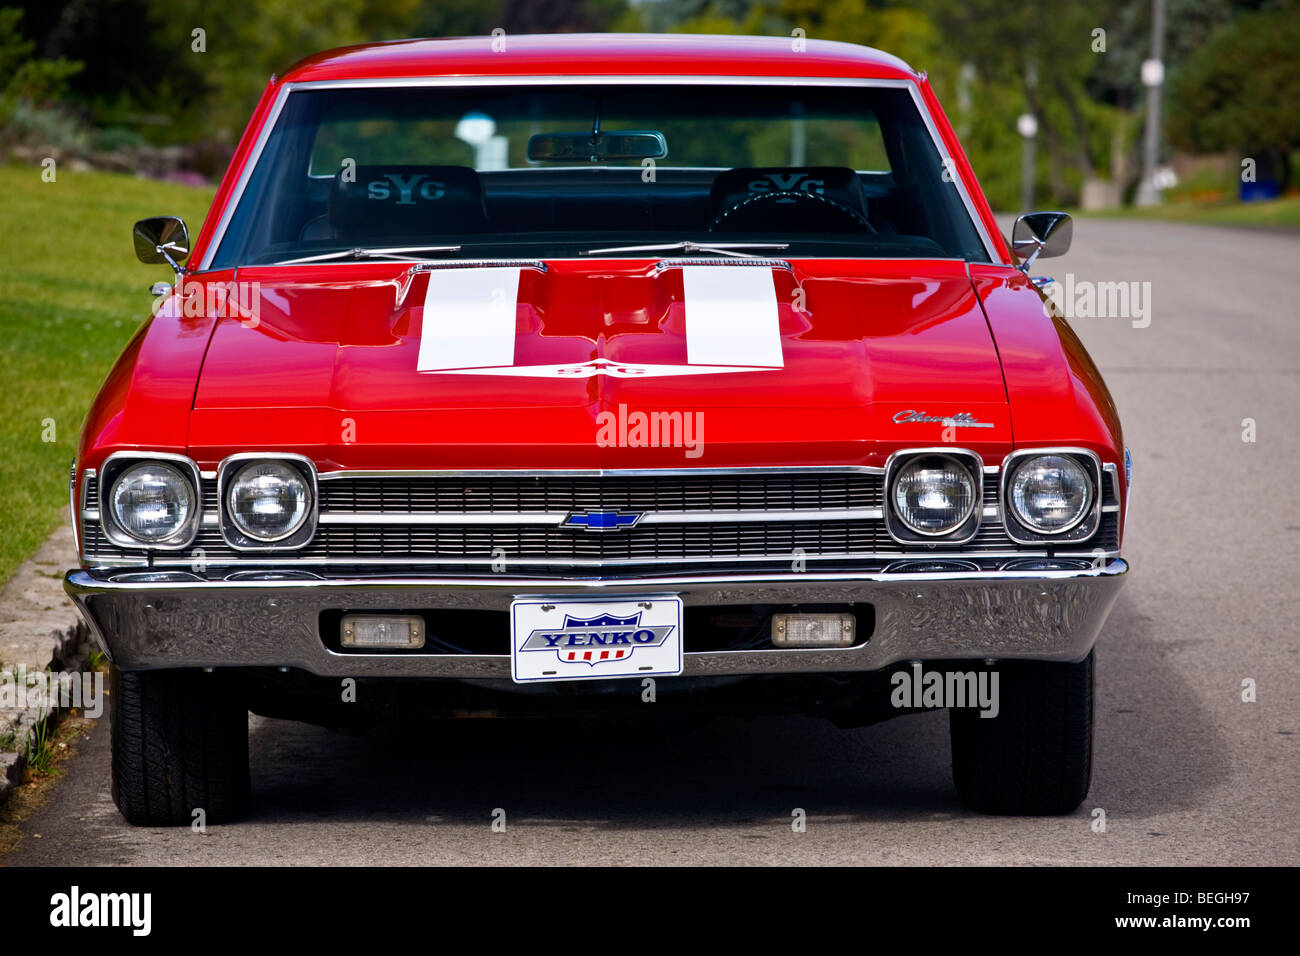 1969 Chevrolet Chevelle Muscle Car on Pavement Stock Photo